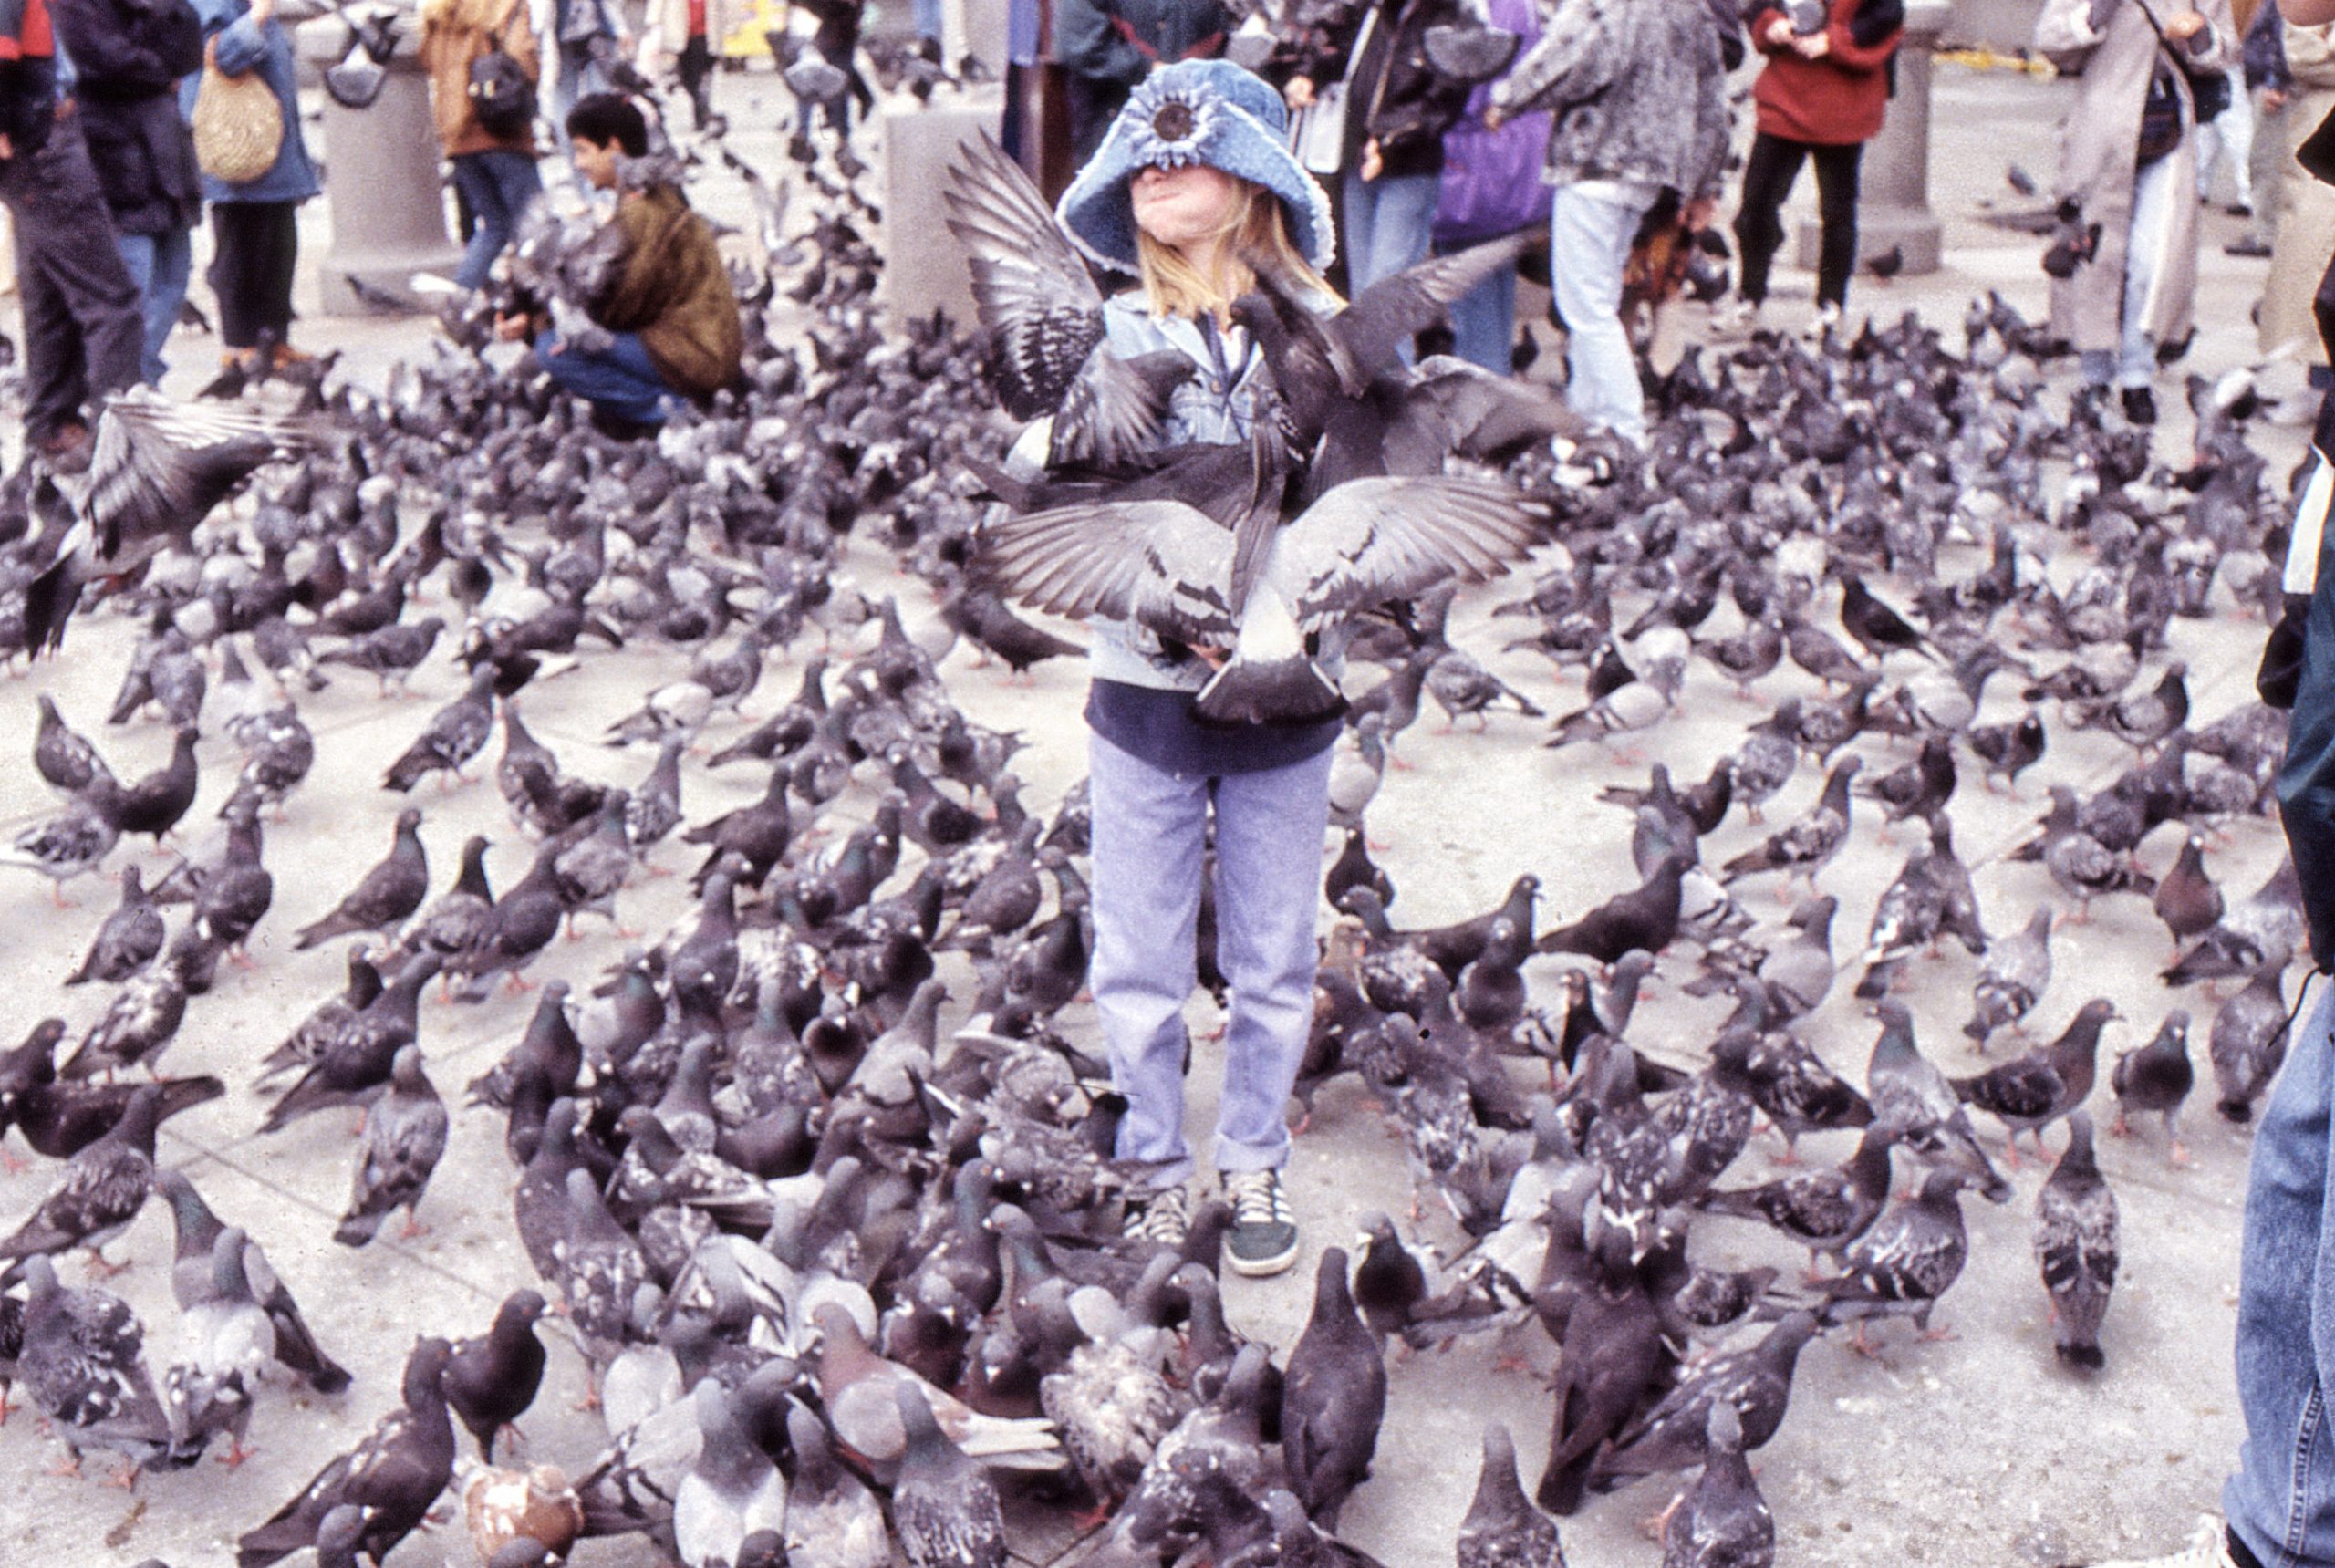 Our daughter and the Trafalgar Square pigeons.